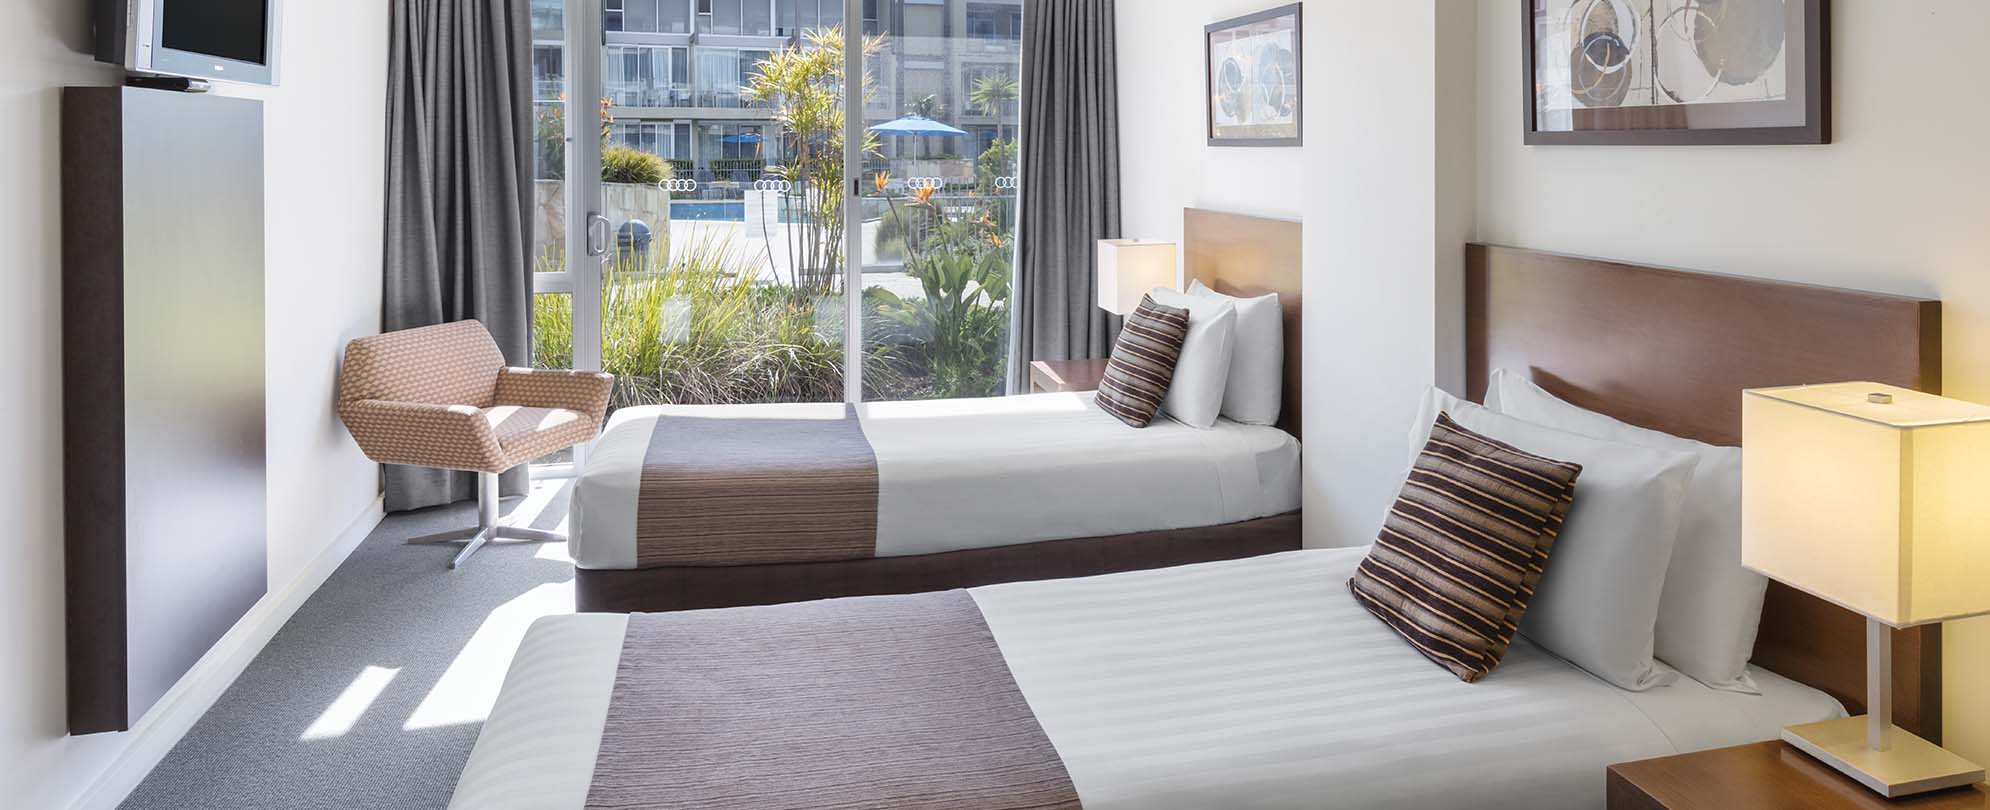 Two twin-sized beds in a 2-bedroom suite at Club Wyndham Torquay.